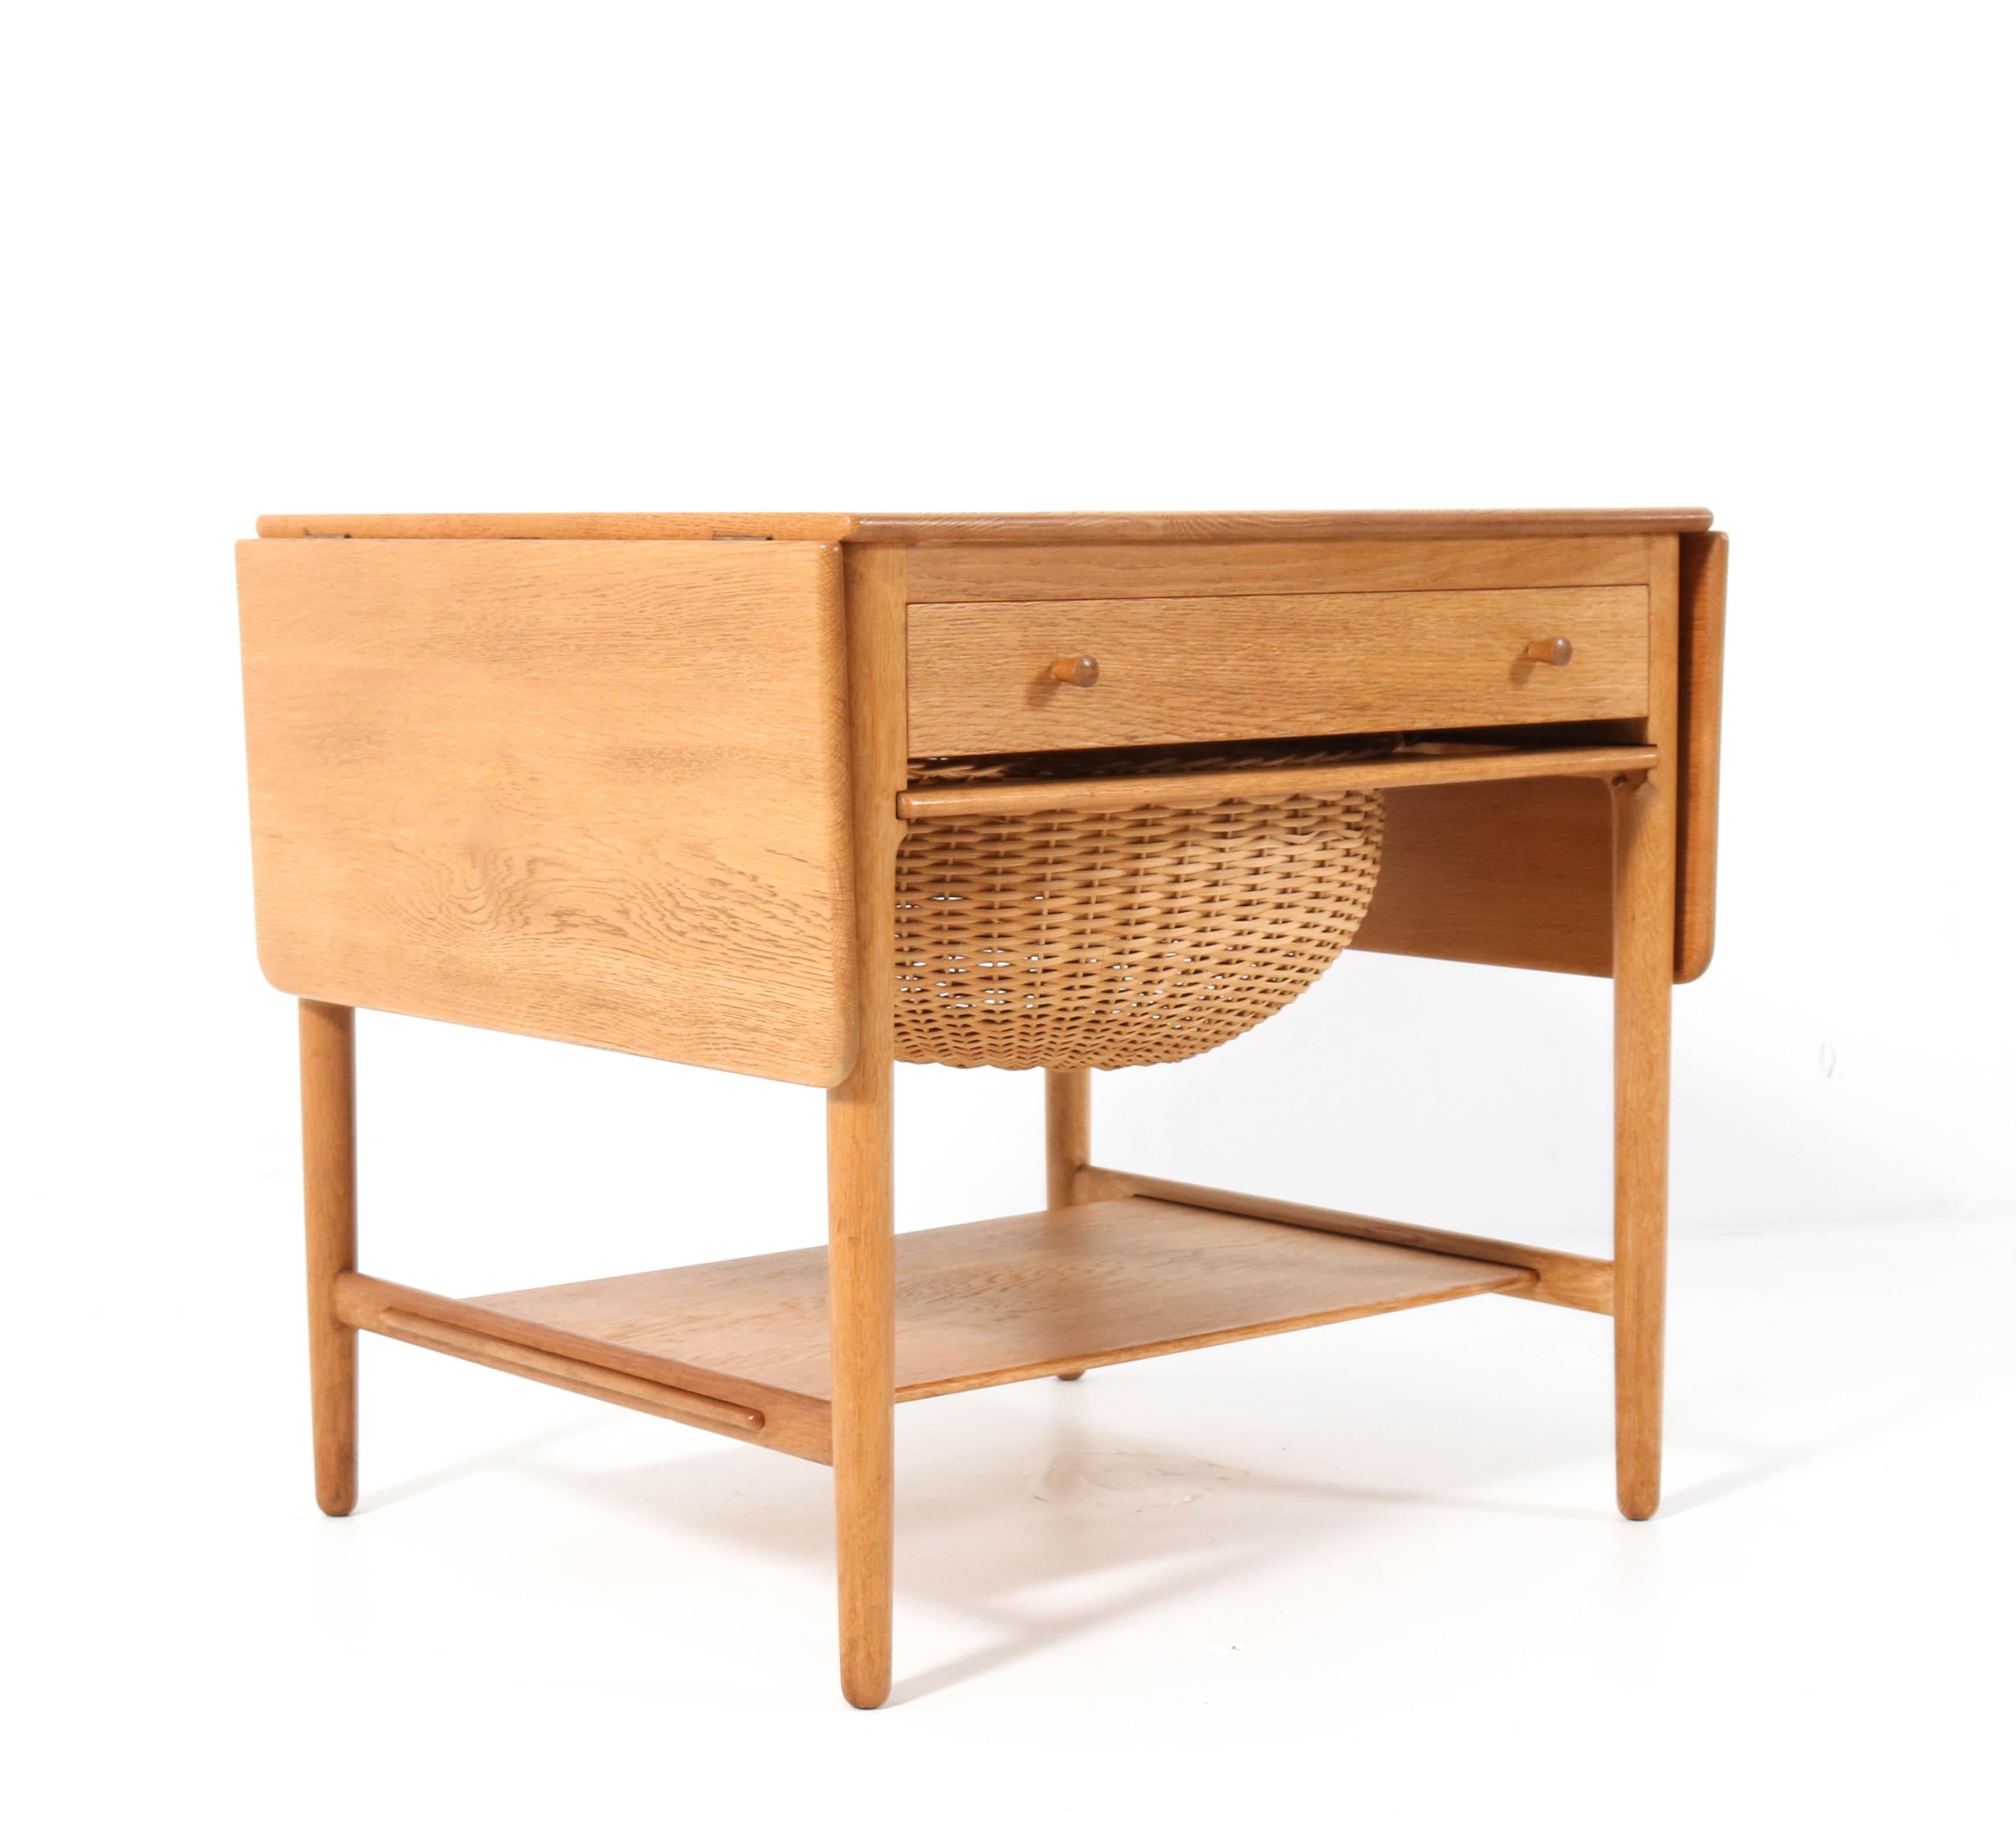 Stunning Mid-Century Modern AT-33 sewing table.
Design by Hans J. Wegner for Andreas Tuck Møbelfabrik.
Striking Danish design from the 1950s.
This version is in solid oak and has two drop-leaves, a front drawer
with several compartments and a